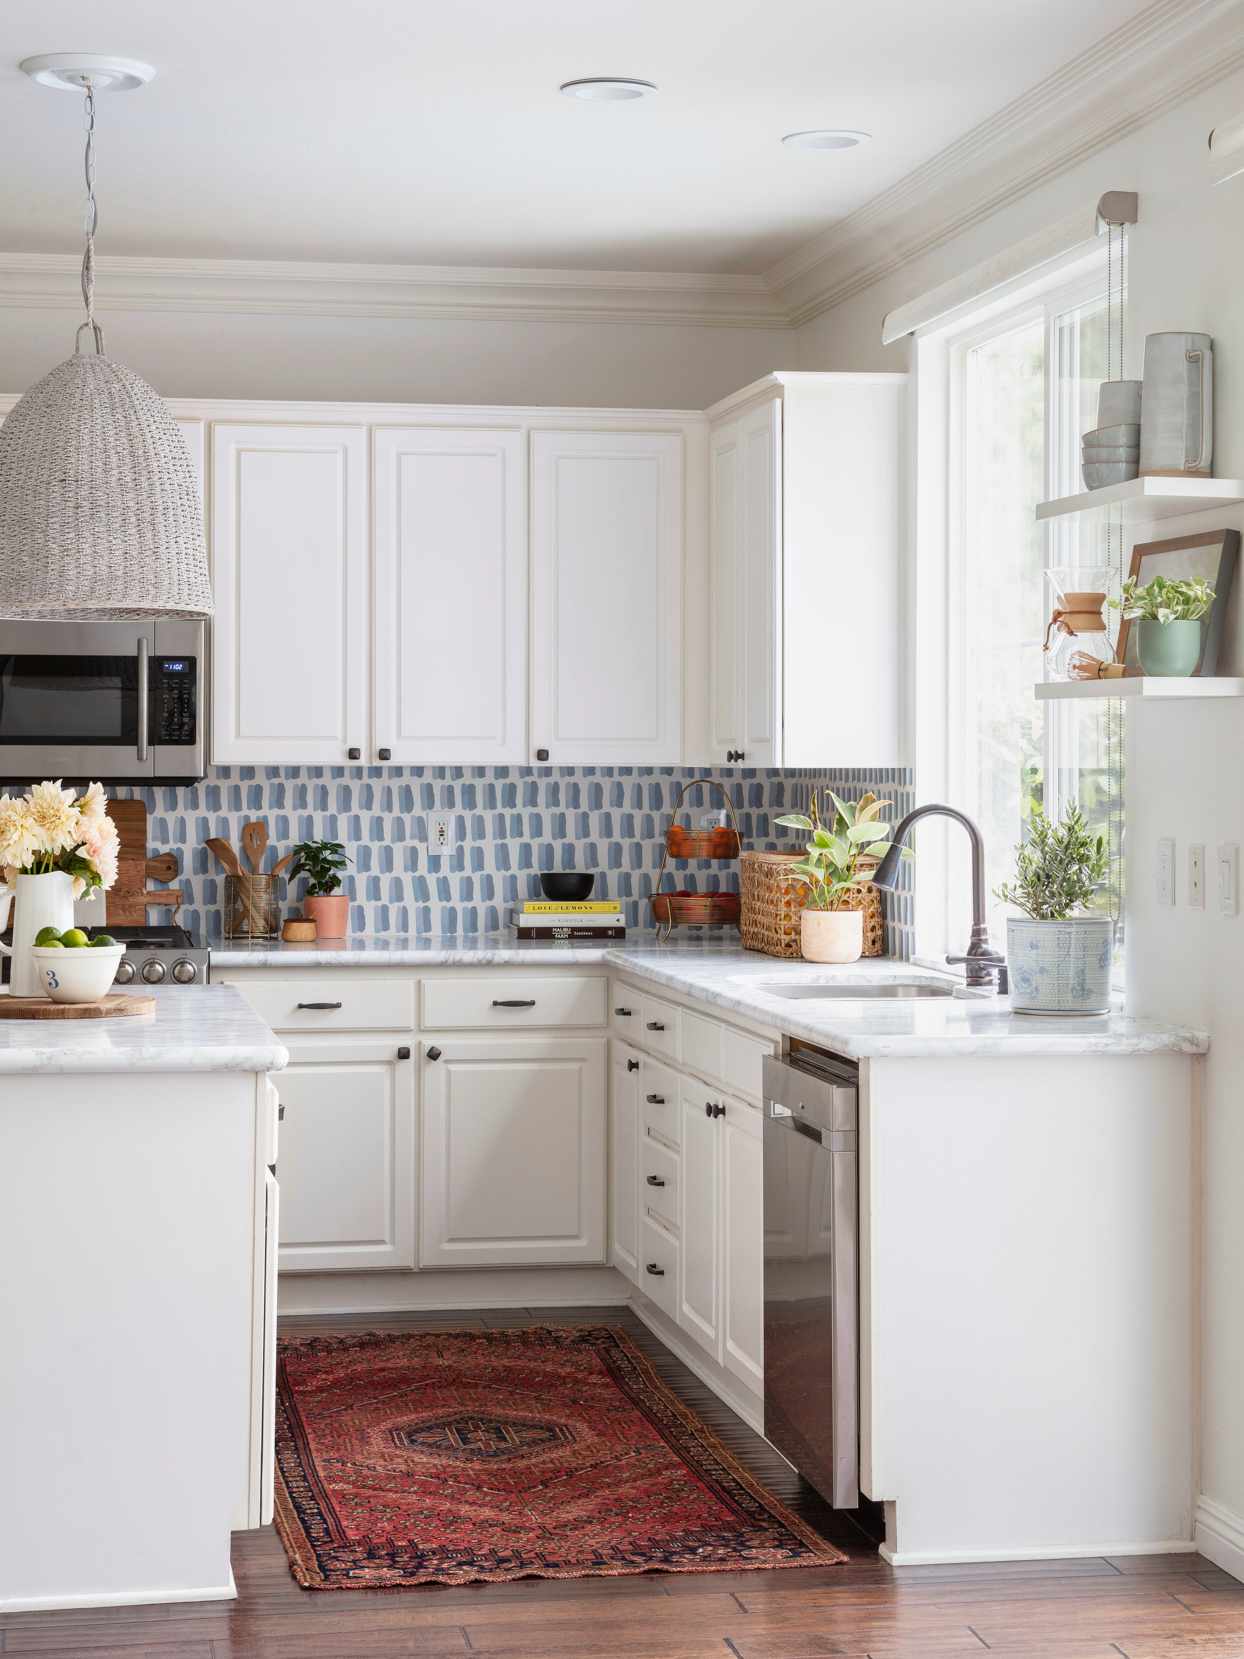 18 Small Kitchen Decorating Ideas for a Big Impact   Better Homes ...